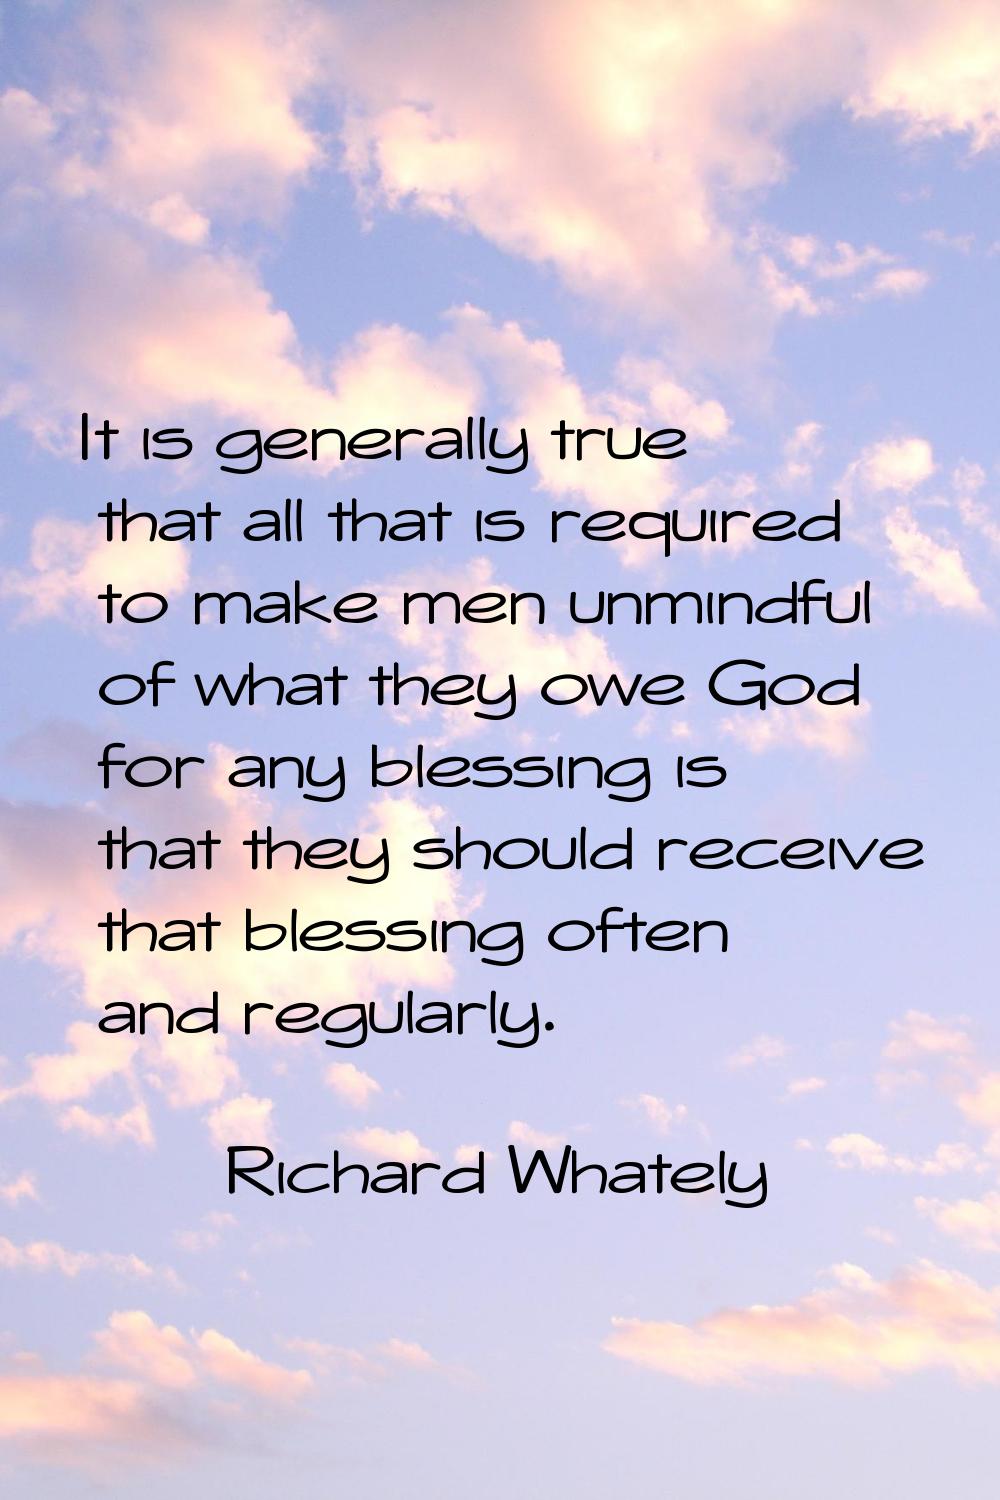 It is generally true that all that is required to make men unmindful of what they owe God for any b